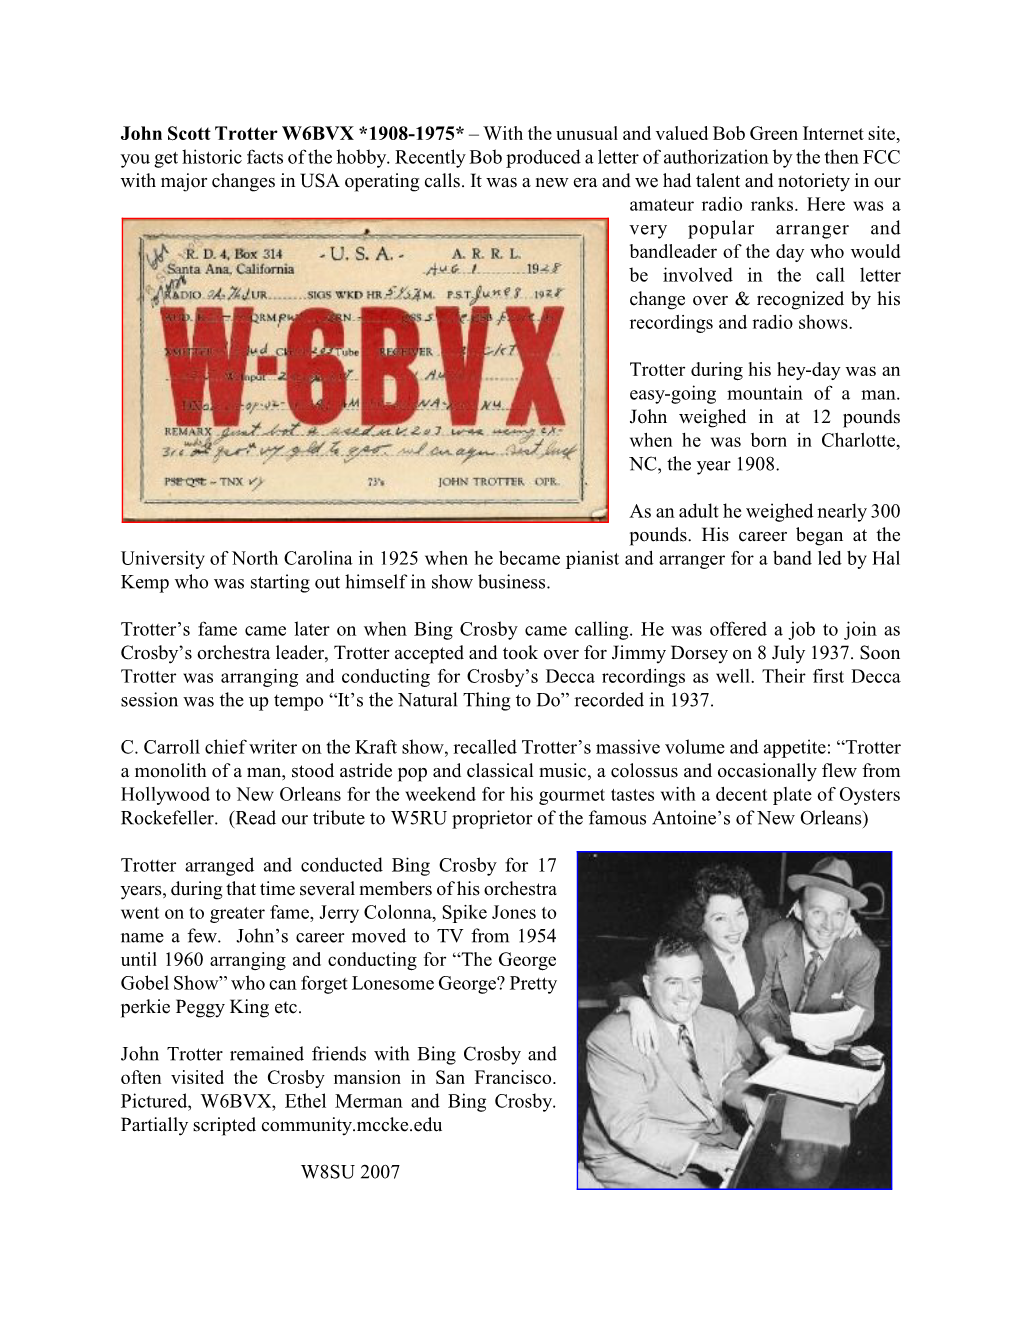 John Scott Trotter W6BVX *1908-1975* – with the Unusual and Valued Bob Green Internet Site, You Get Historic Facts of the Hobby